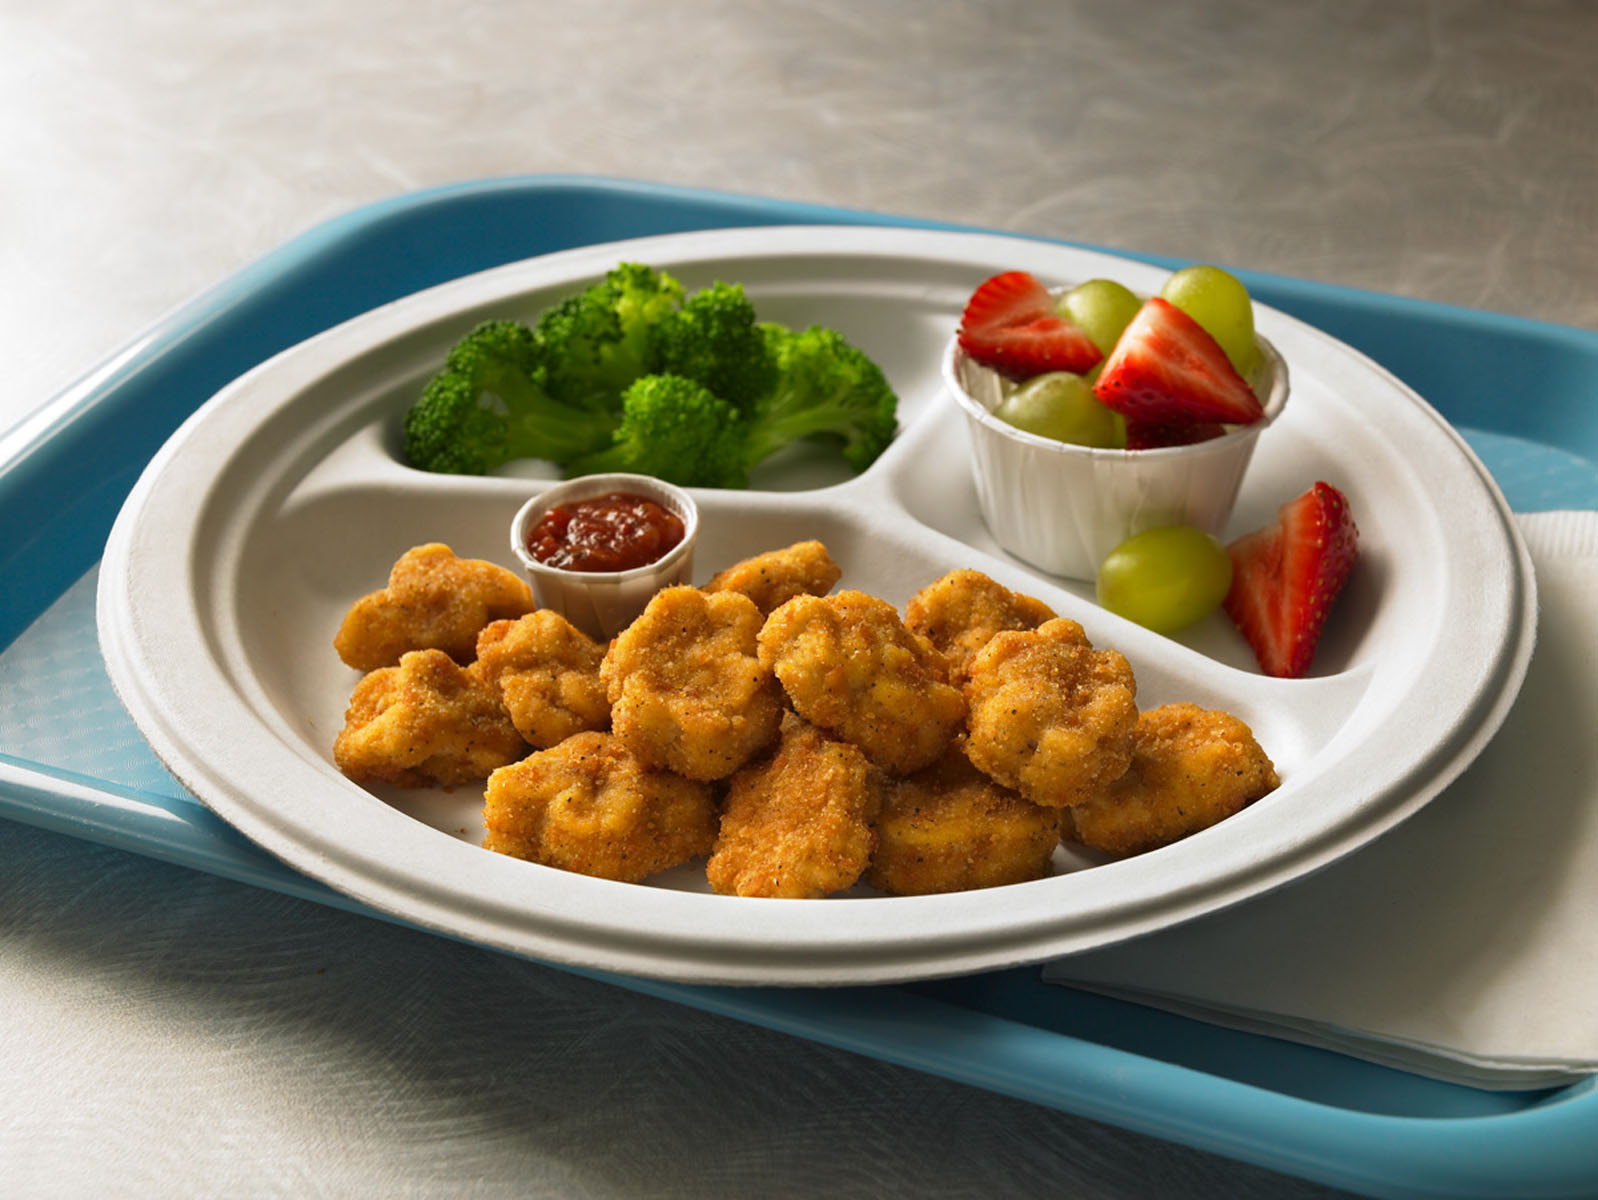 PERDUE® SNACK-ATIZERS® NO ANTIBIOTICS EVER, Fully Cooked, Whole Grain Breaded Chicken Breast Chunks, CN…<br/>(89541)